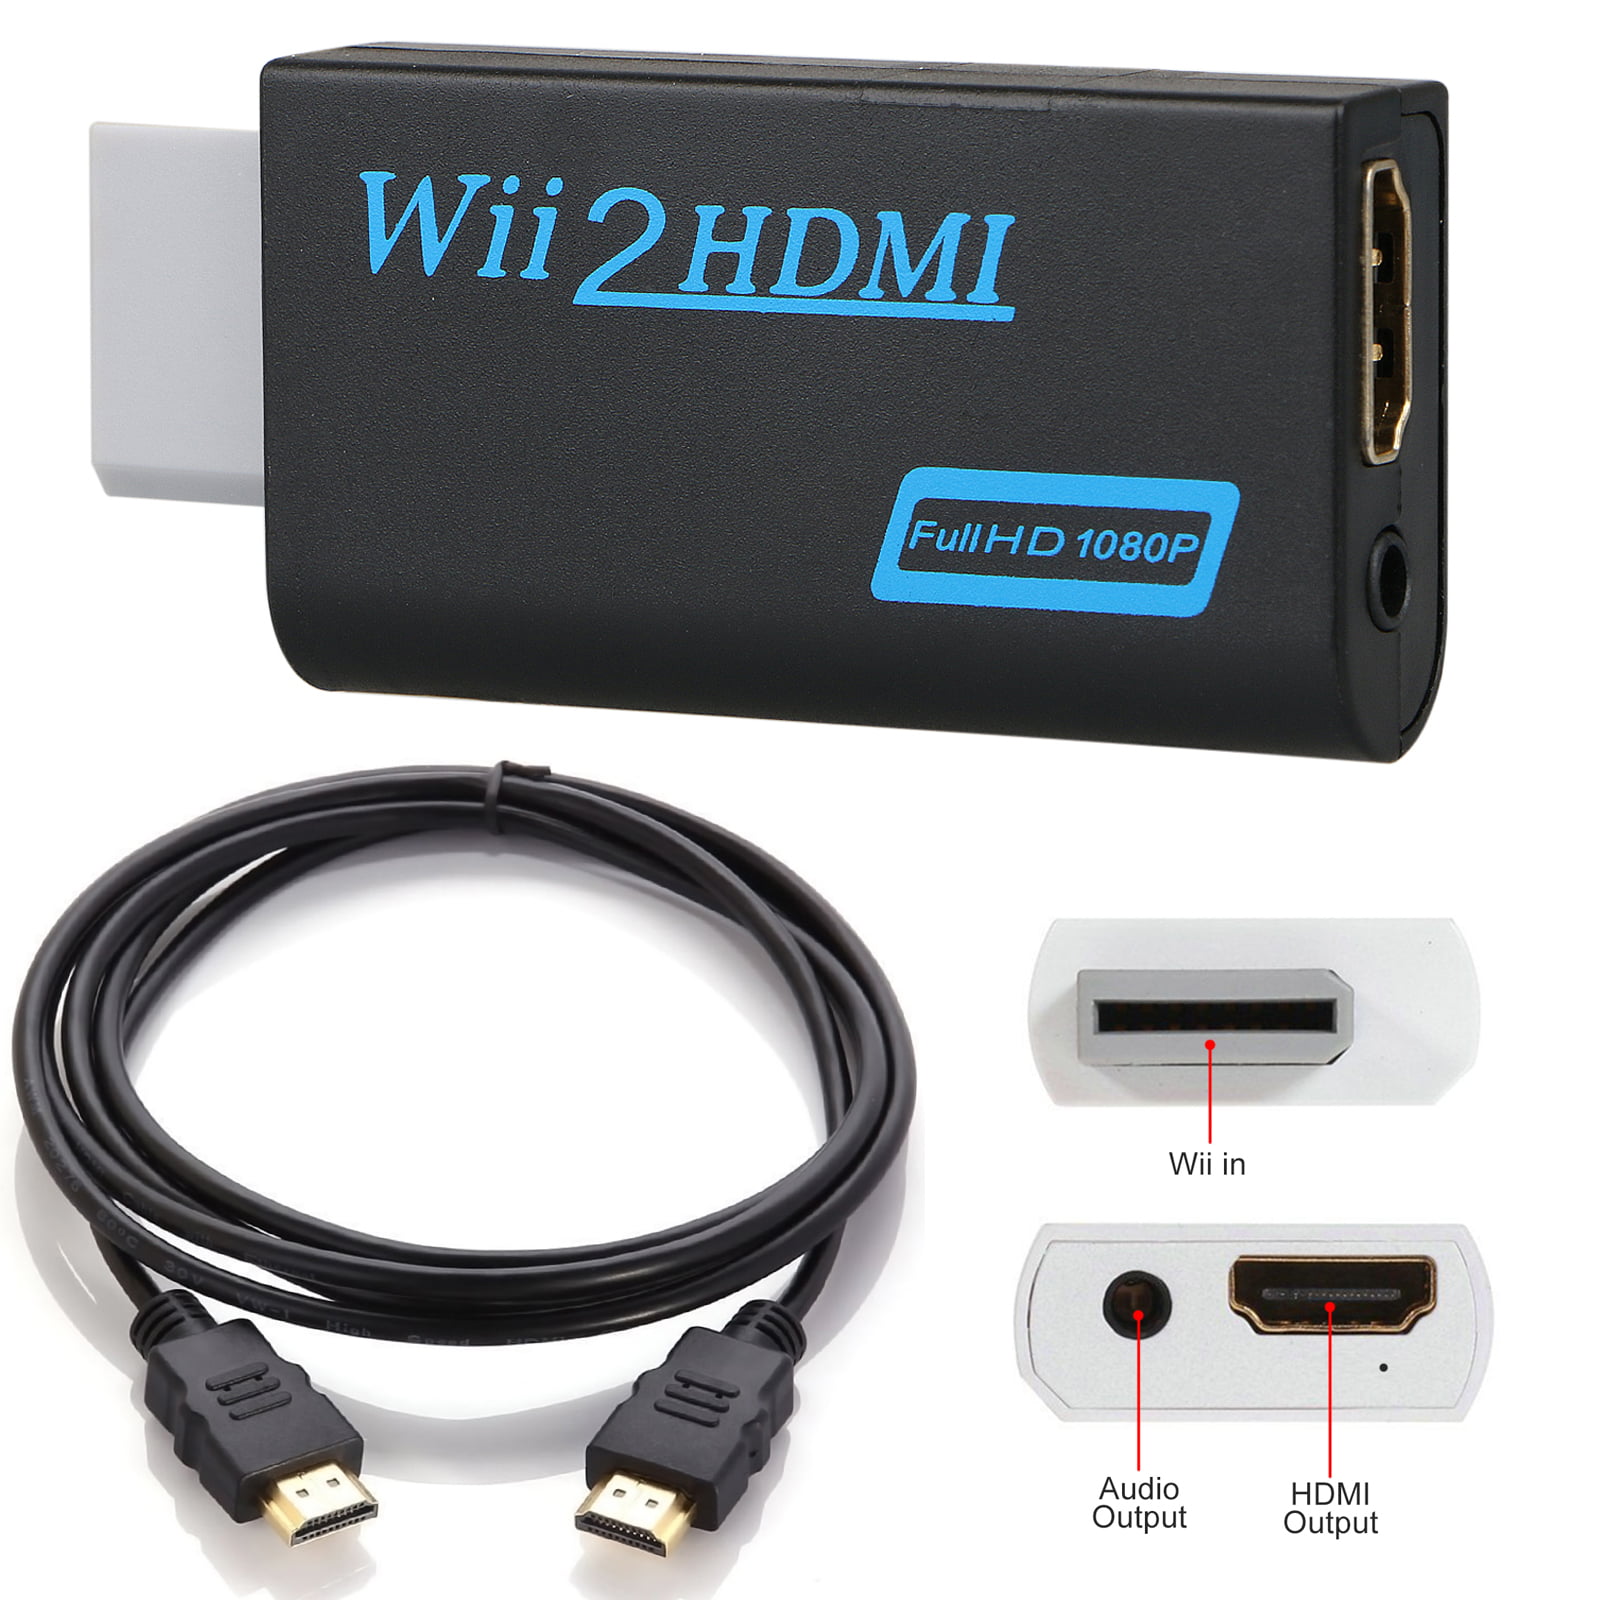 wii to hdmi